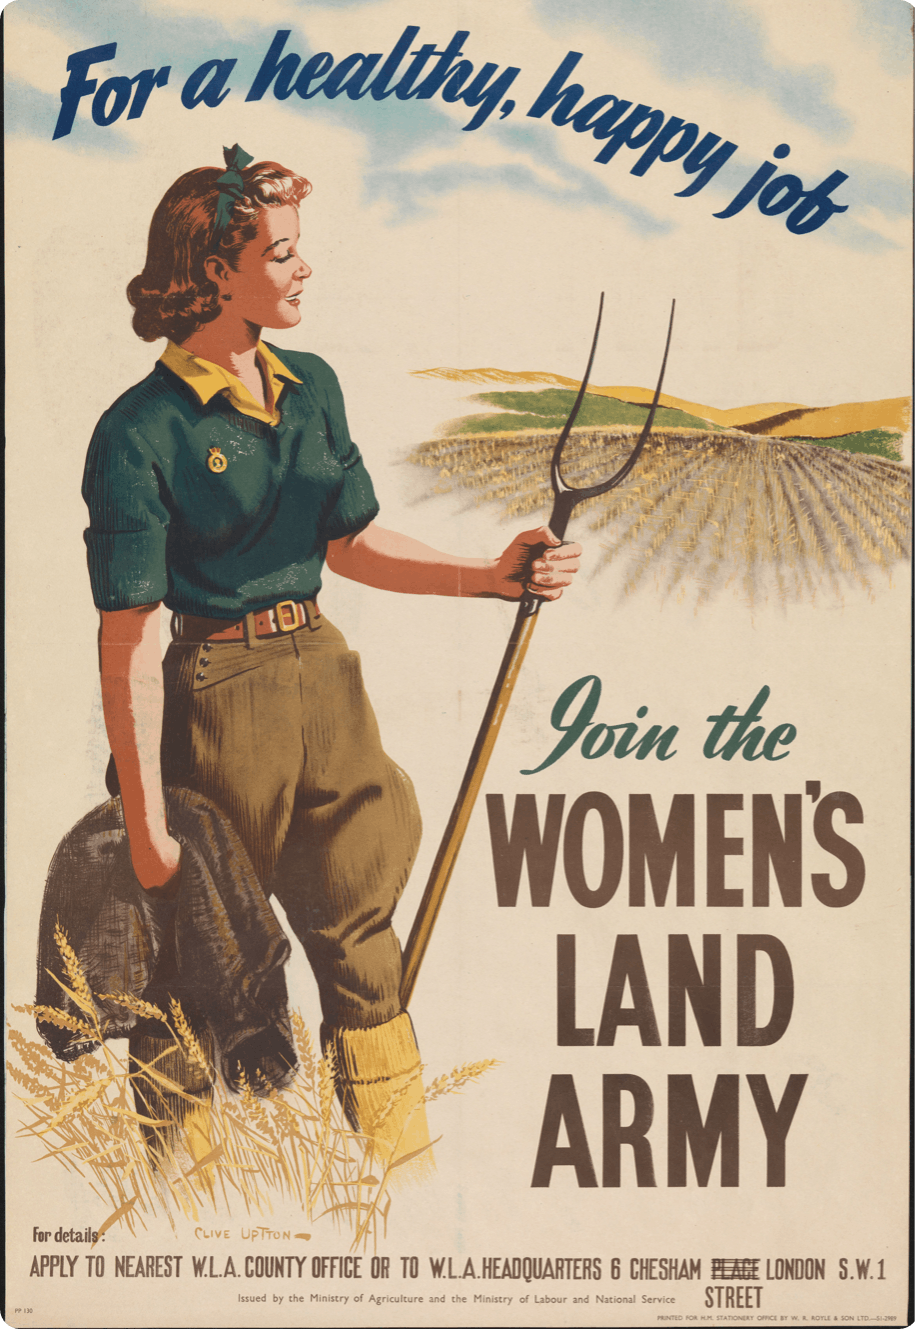 A poster recruiting for the Women’s Land Army in WW2